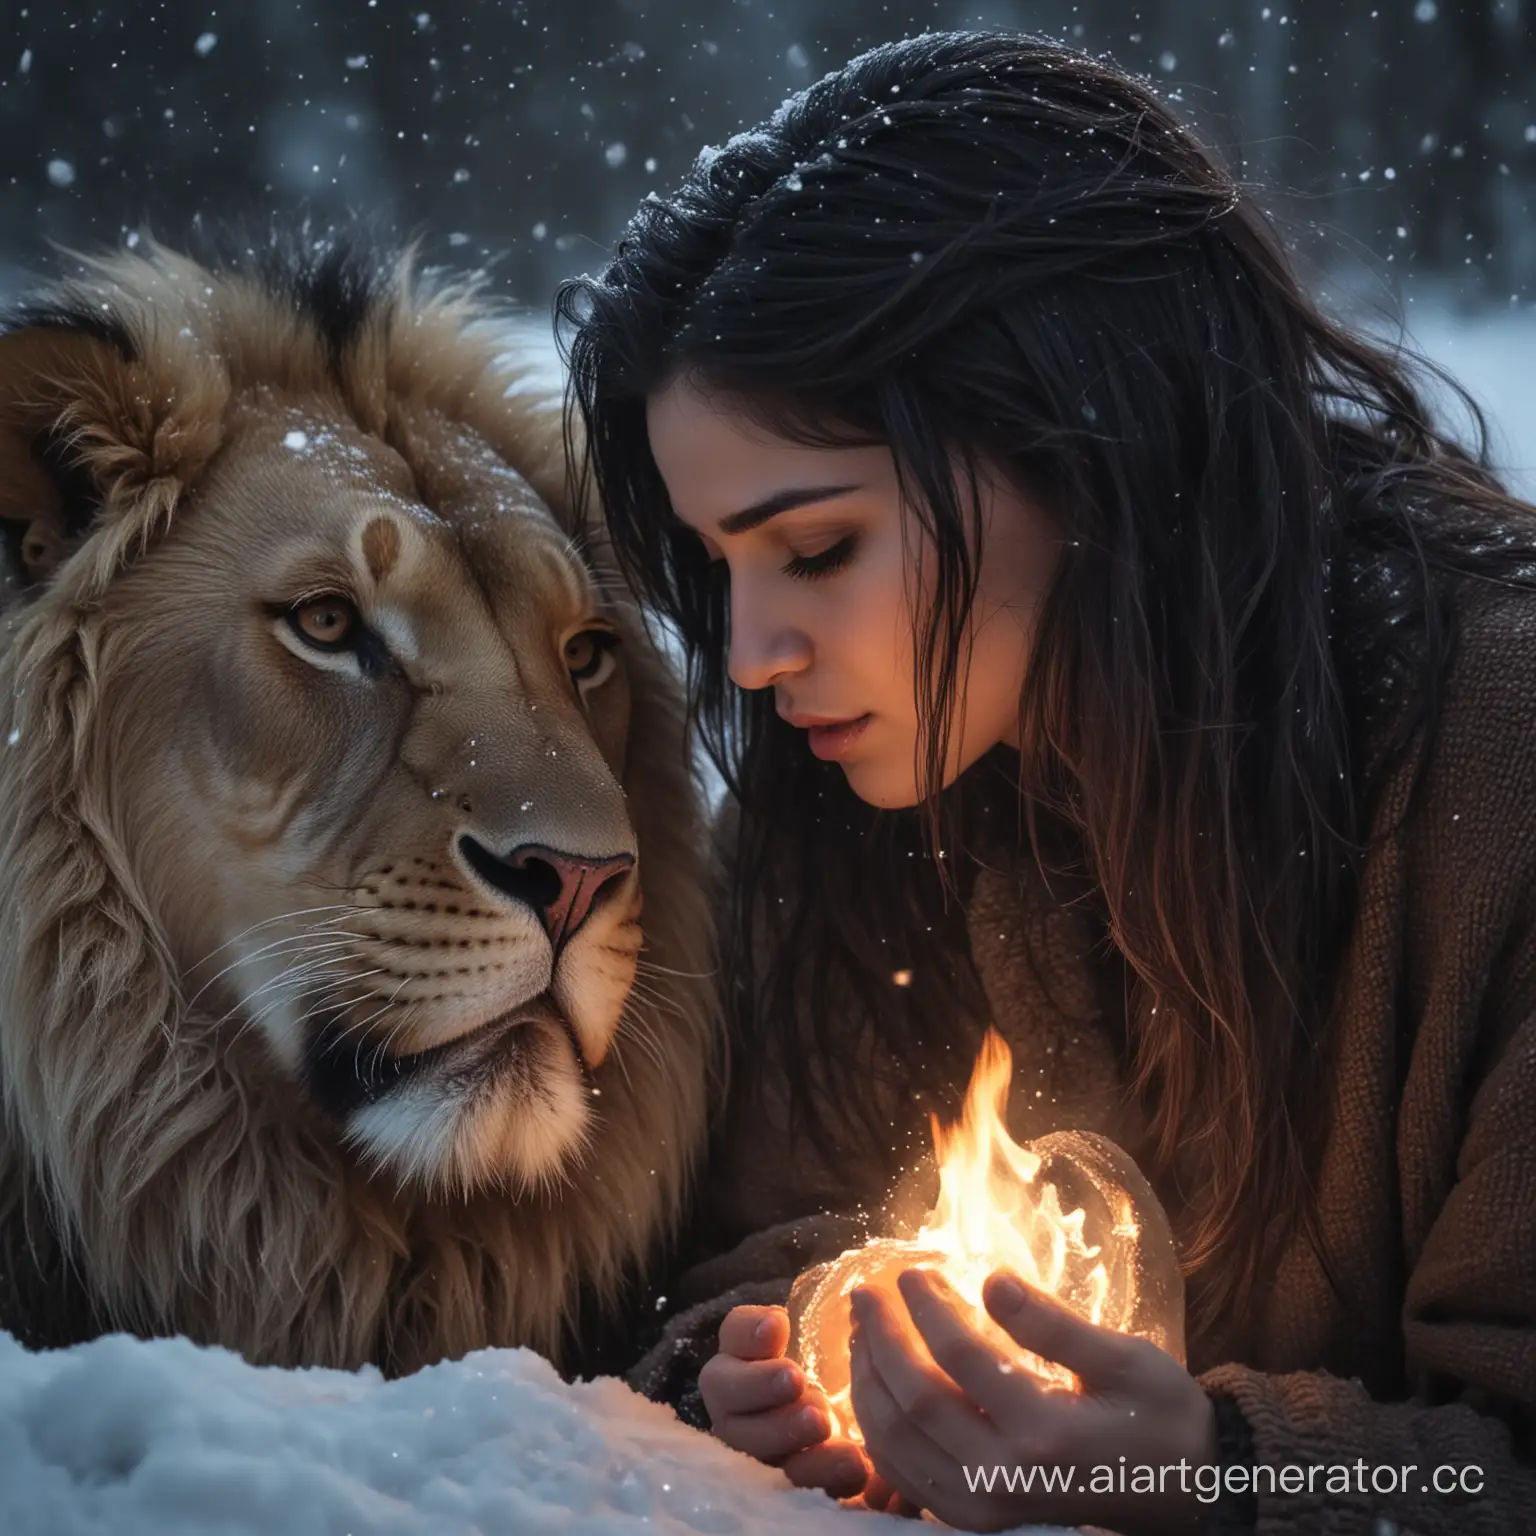 Symbolic-Love-Girl-with-Cancer-and-Man-with-Lion-Embrace-in-Elemental-Harmony